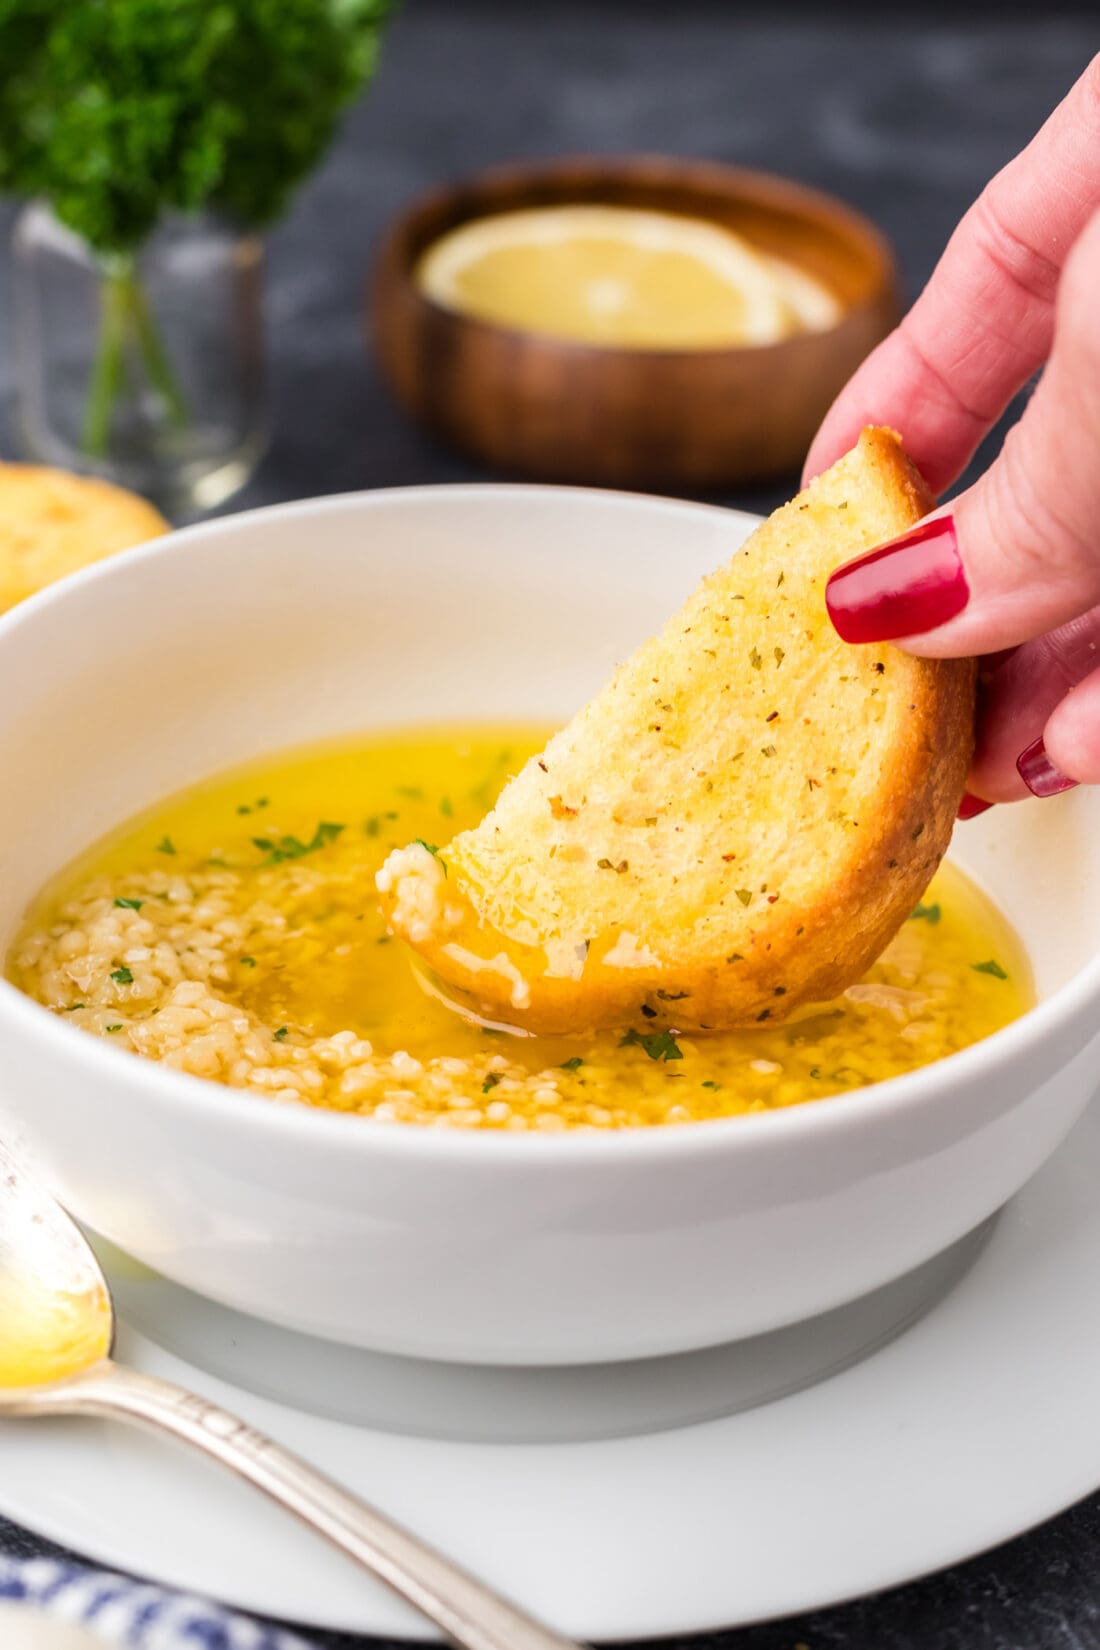 Piece of bread being dipped into Garlic Butter Sauce